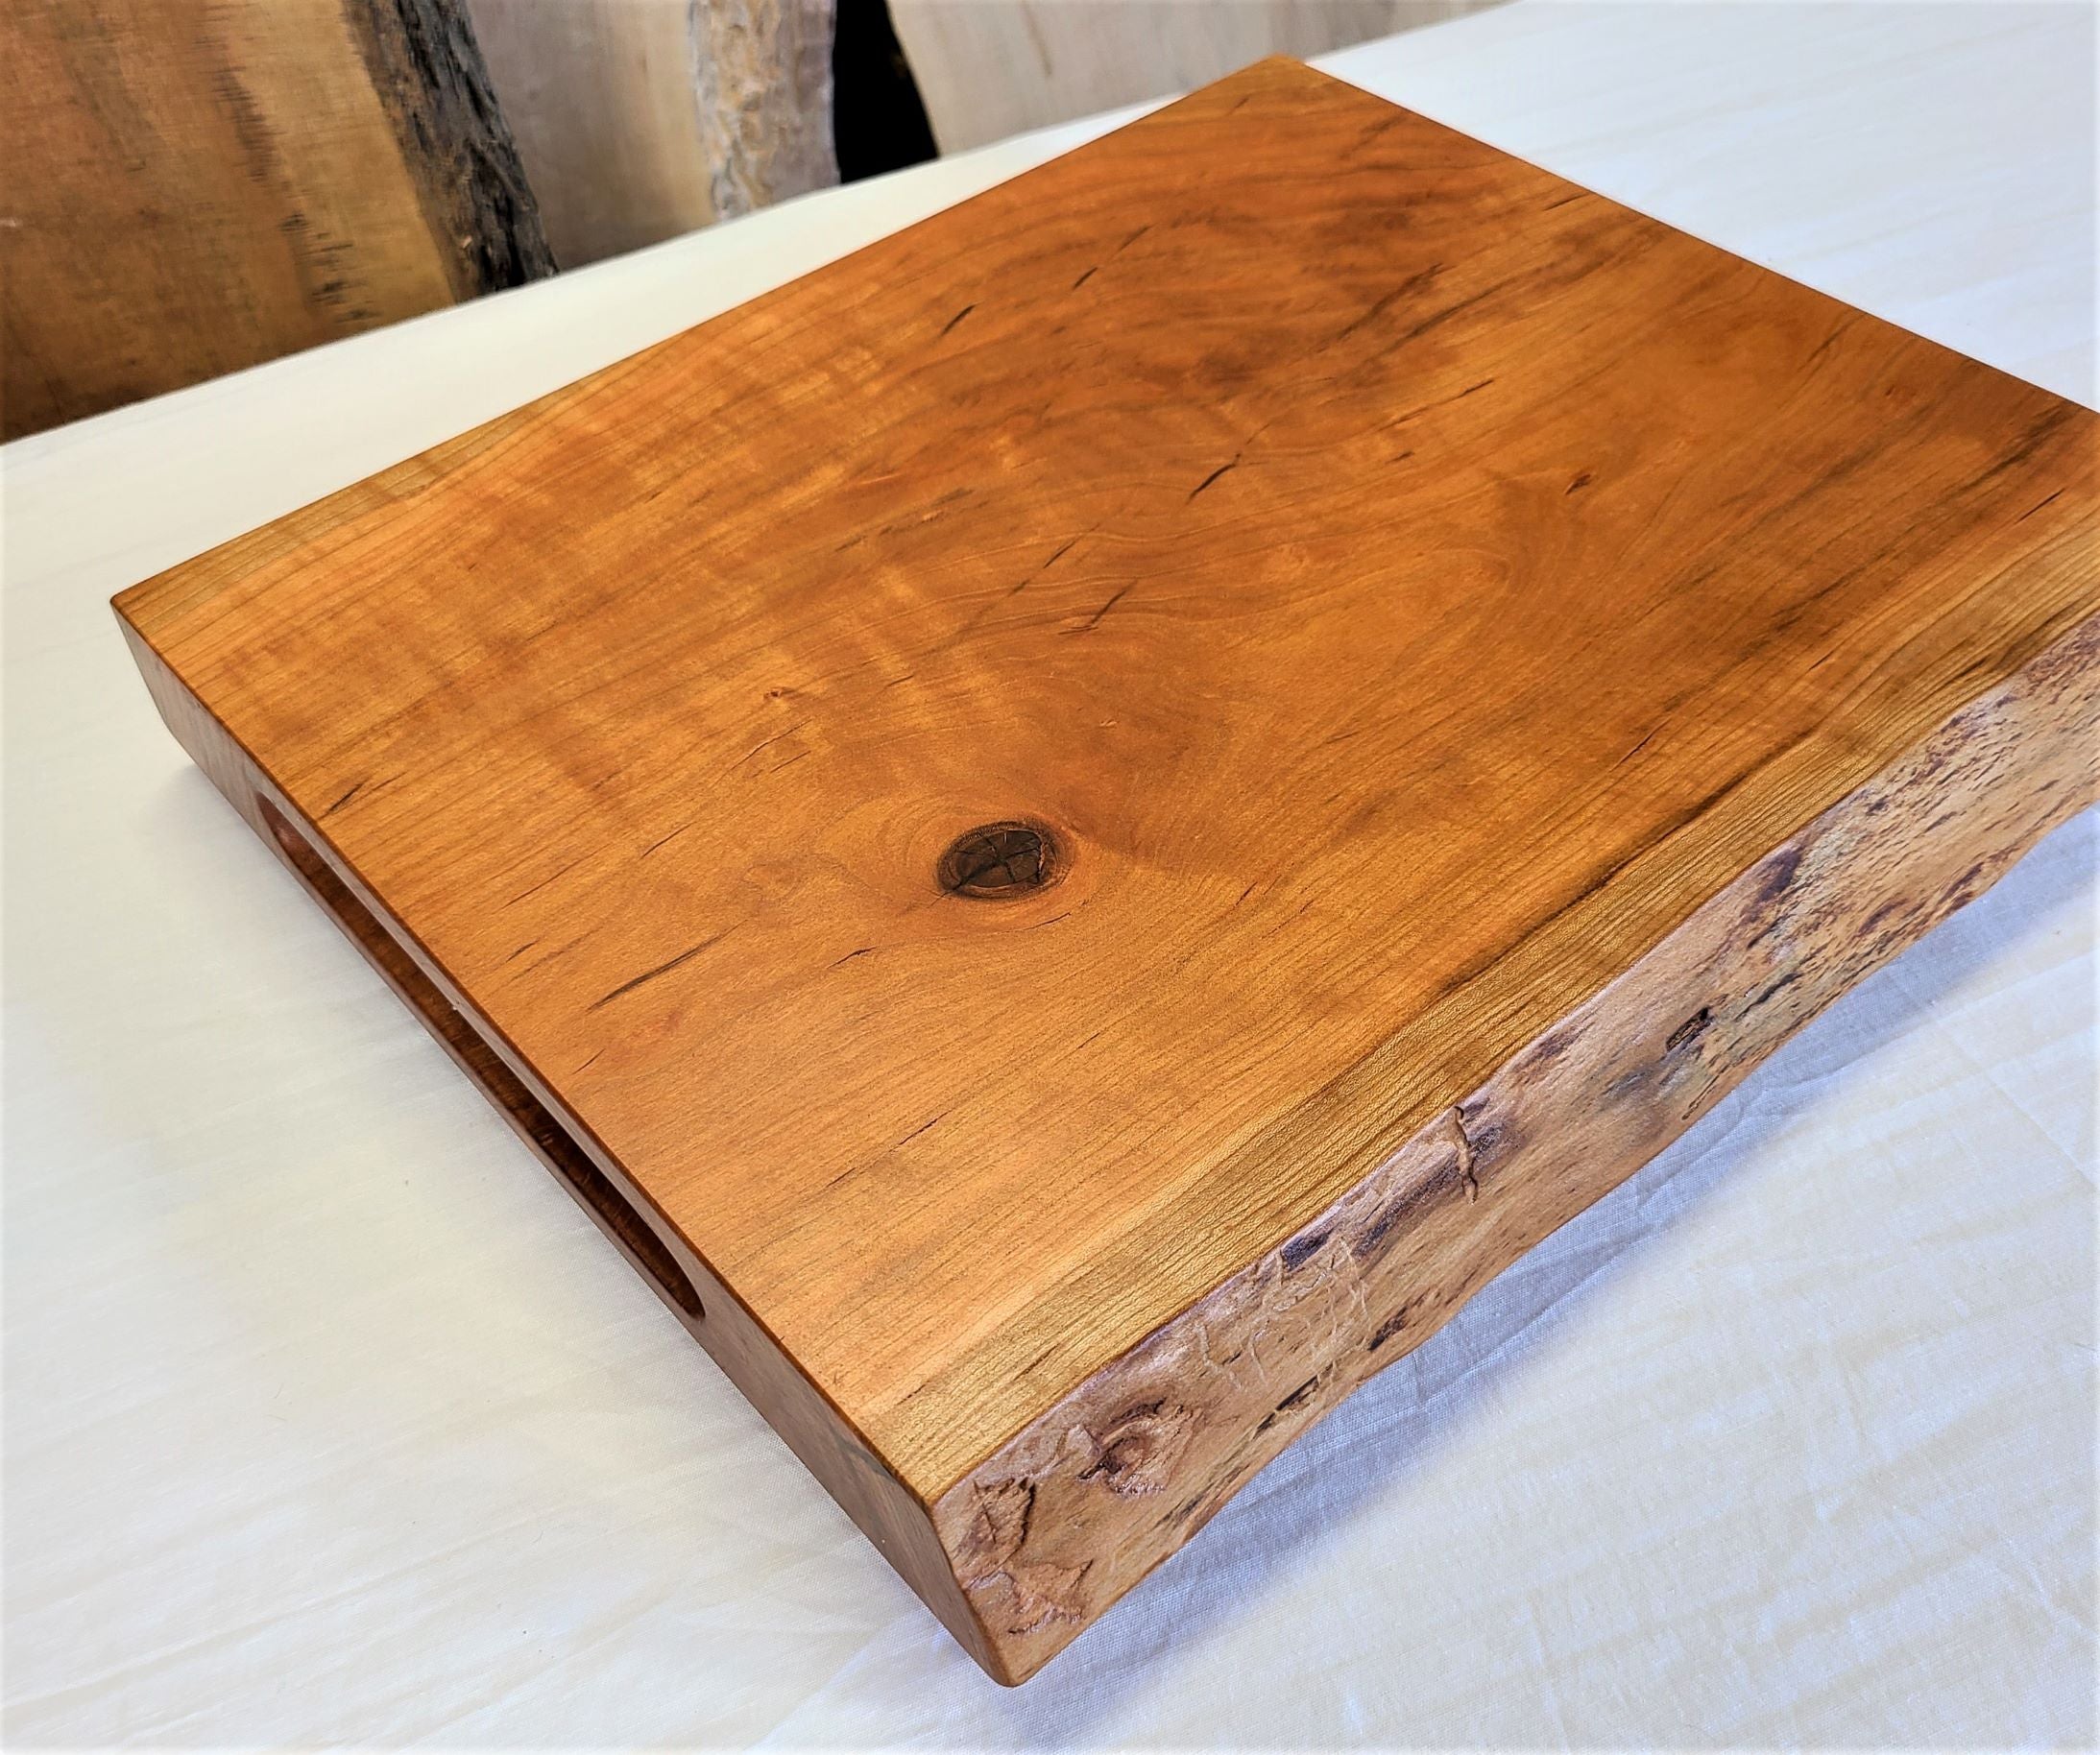 custom cutting board made of solid cherry.  Live edge charcuterie board, cutting, slicing or serving board.  Made in USA by ZimBoards